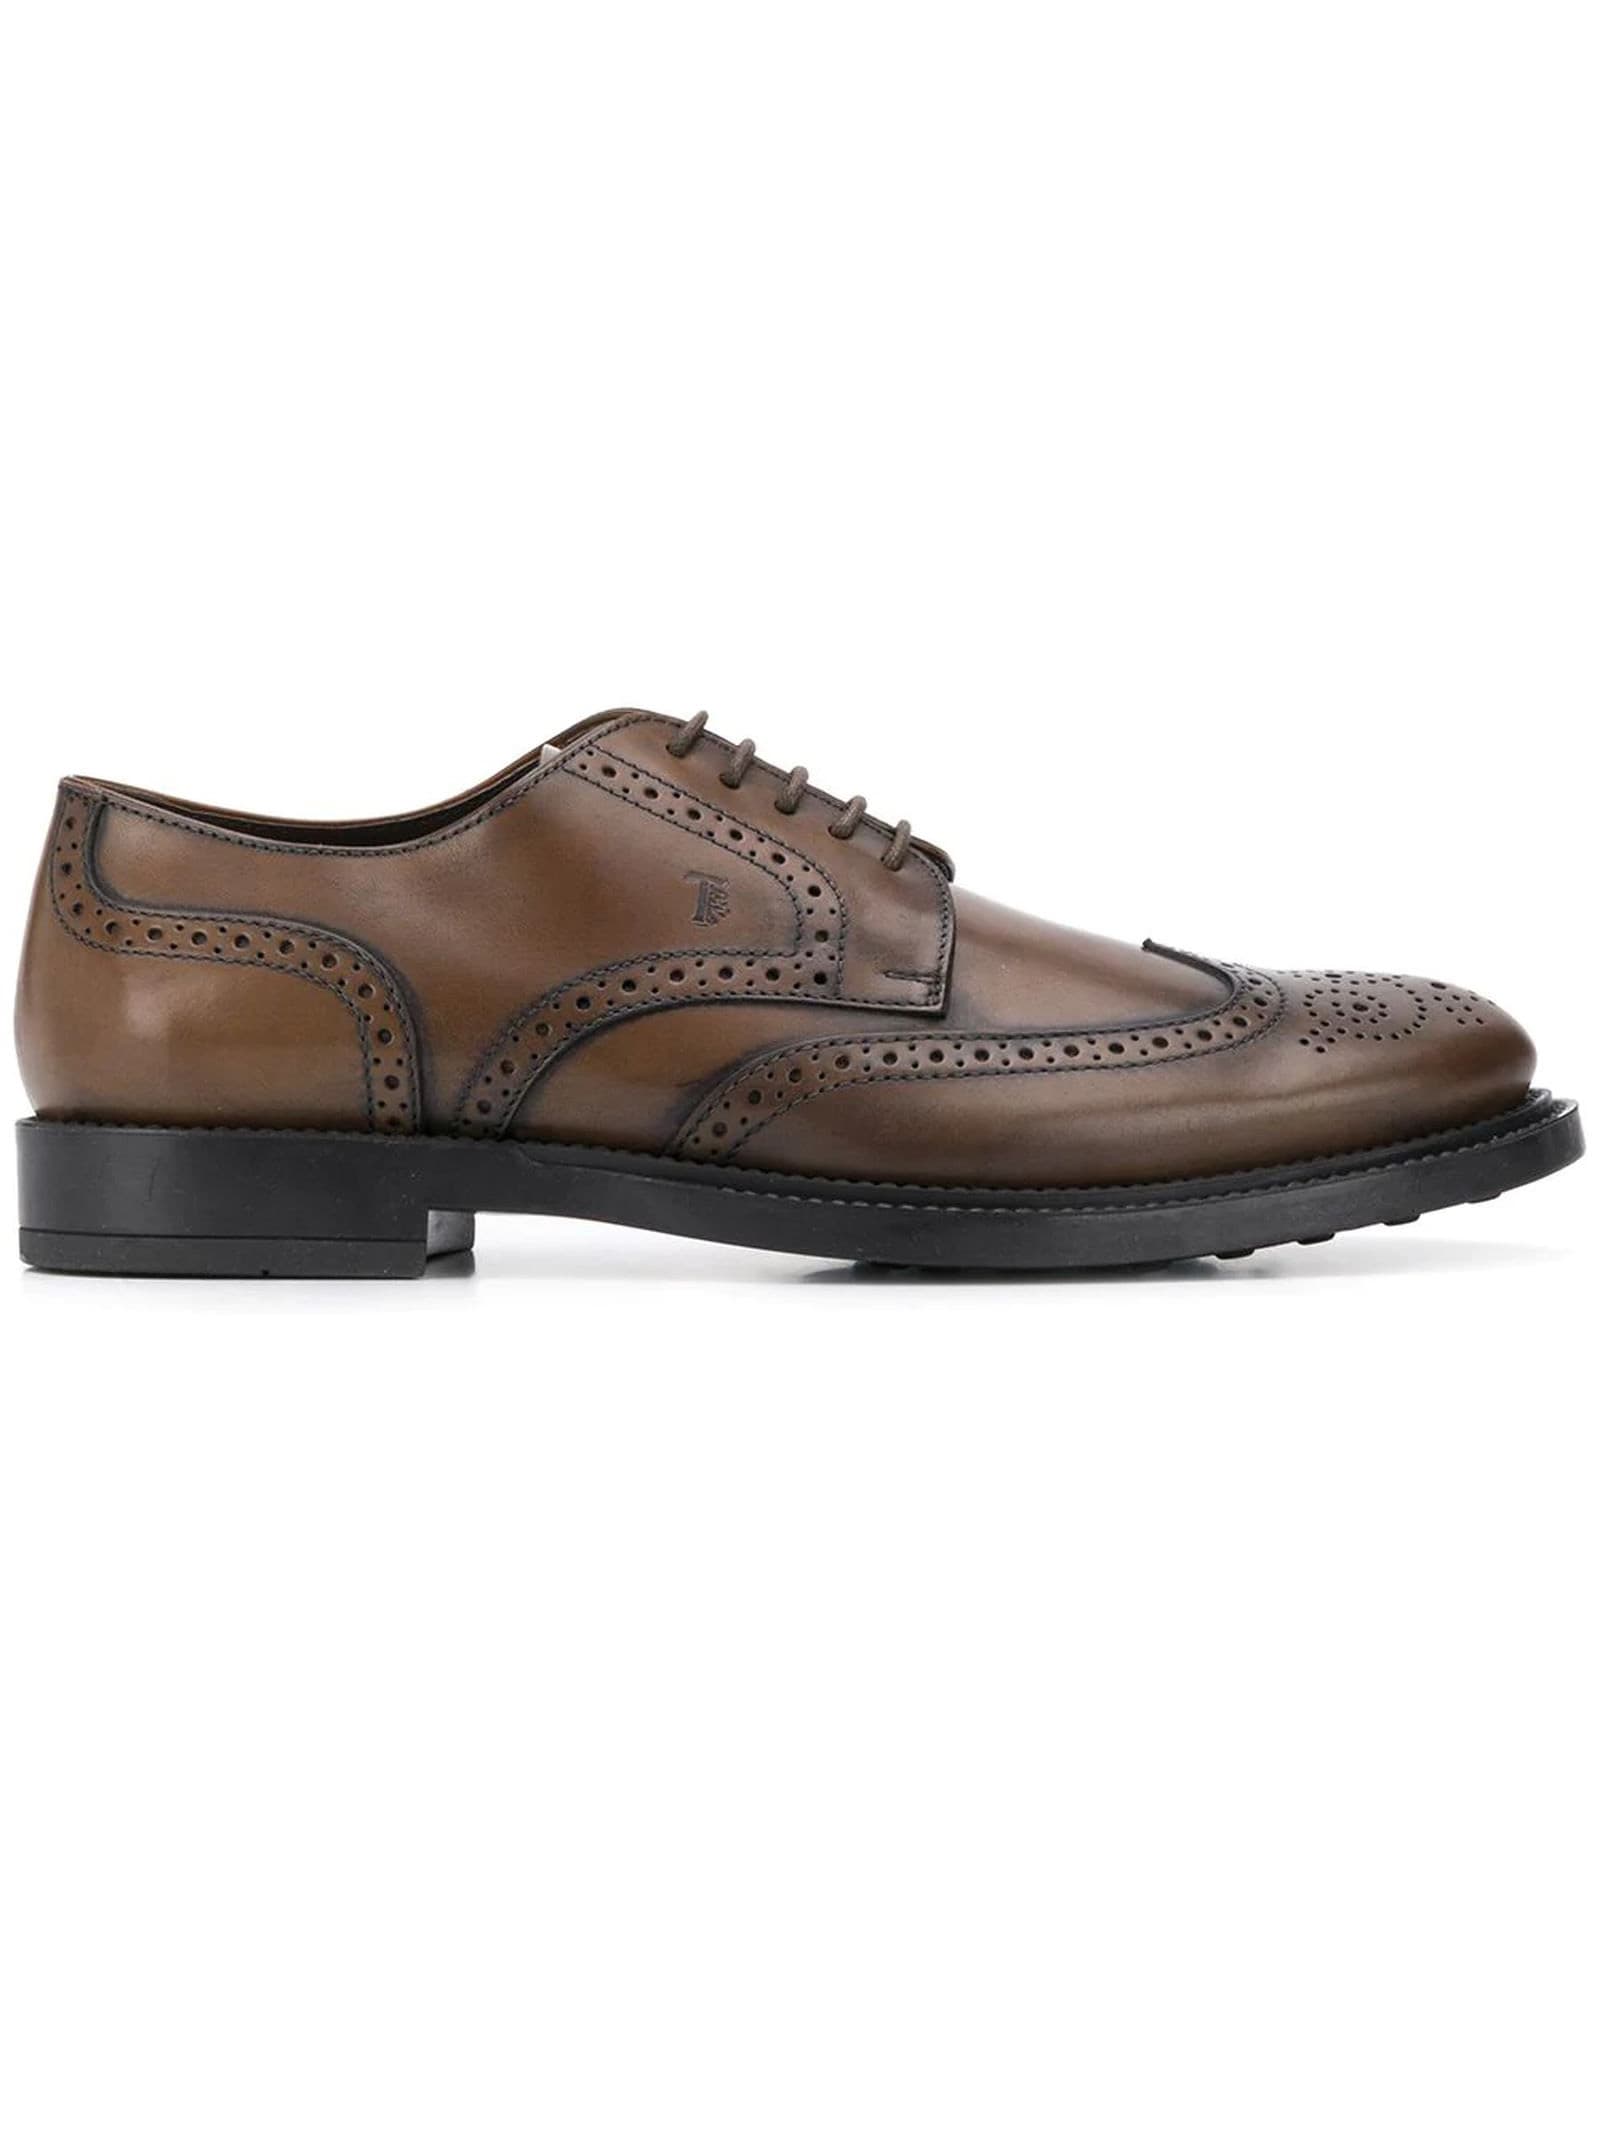 Tods Lace Ups In Brown Smooth Leather